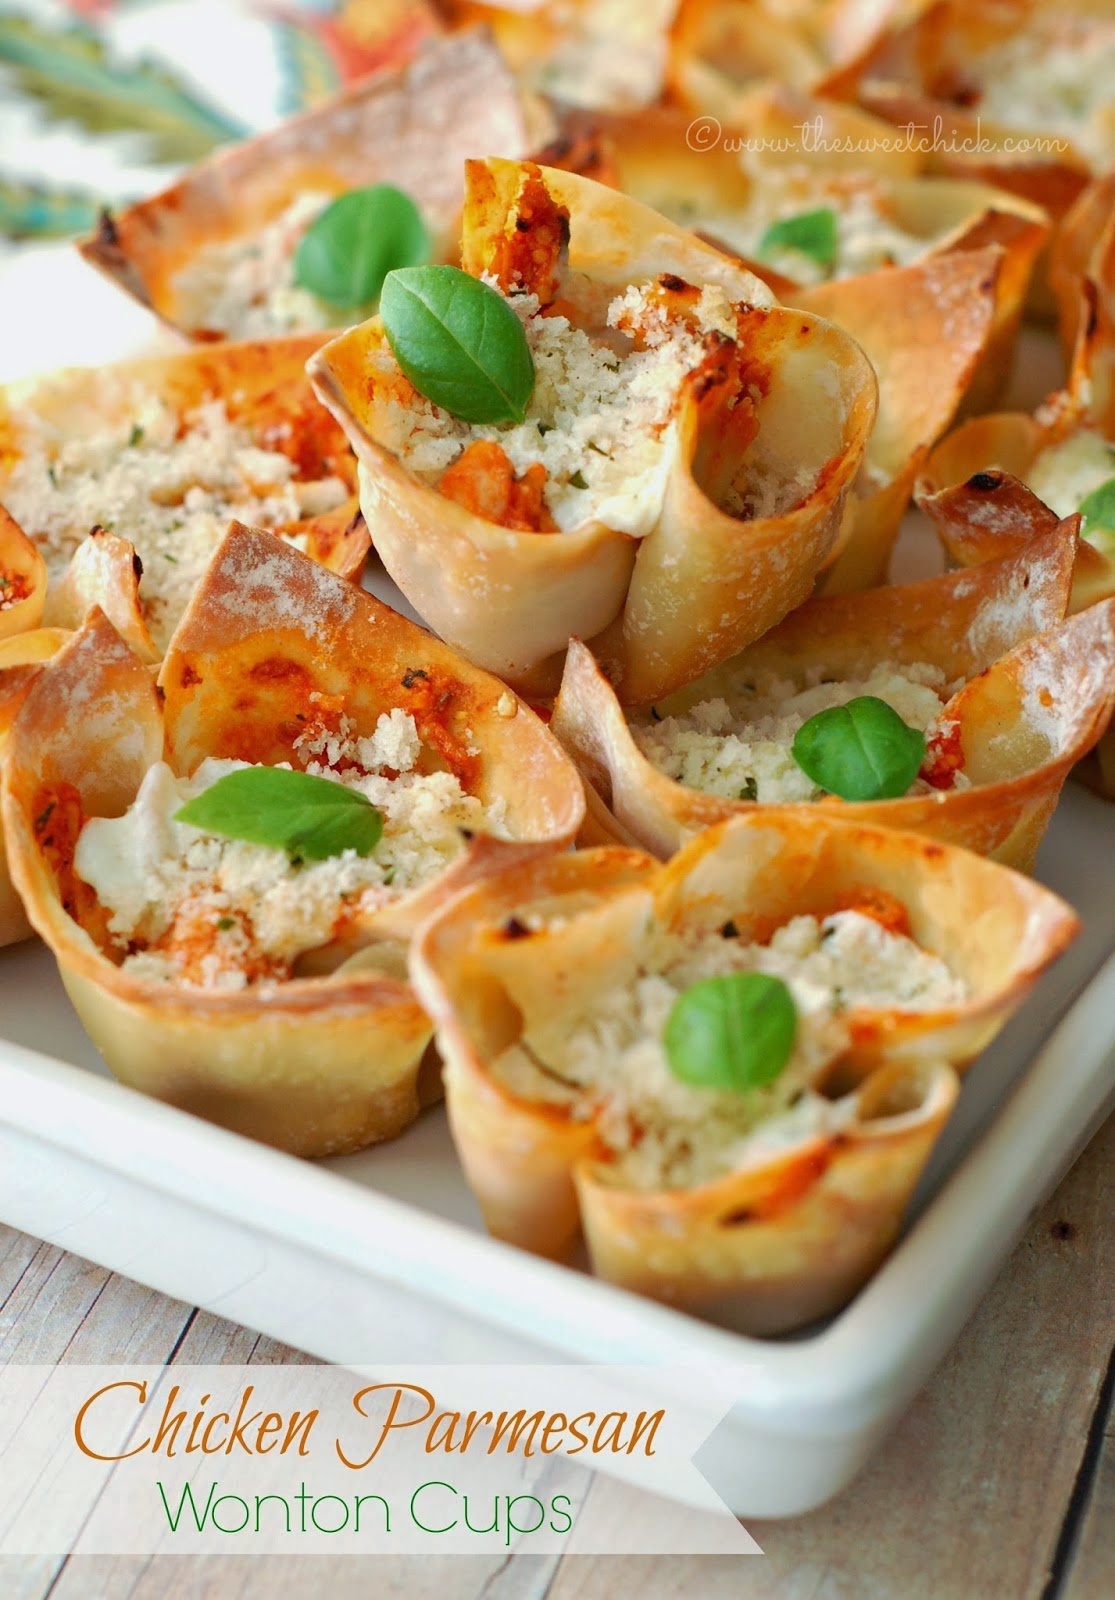 Chicken Parmesan Wonton Cups by The Sweet Chick